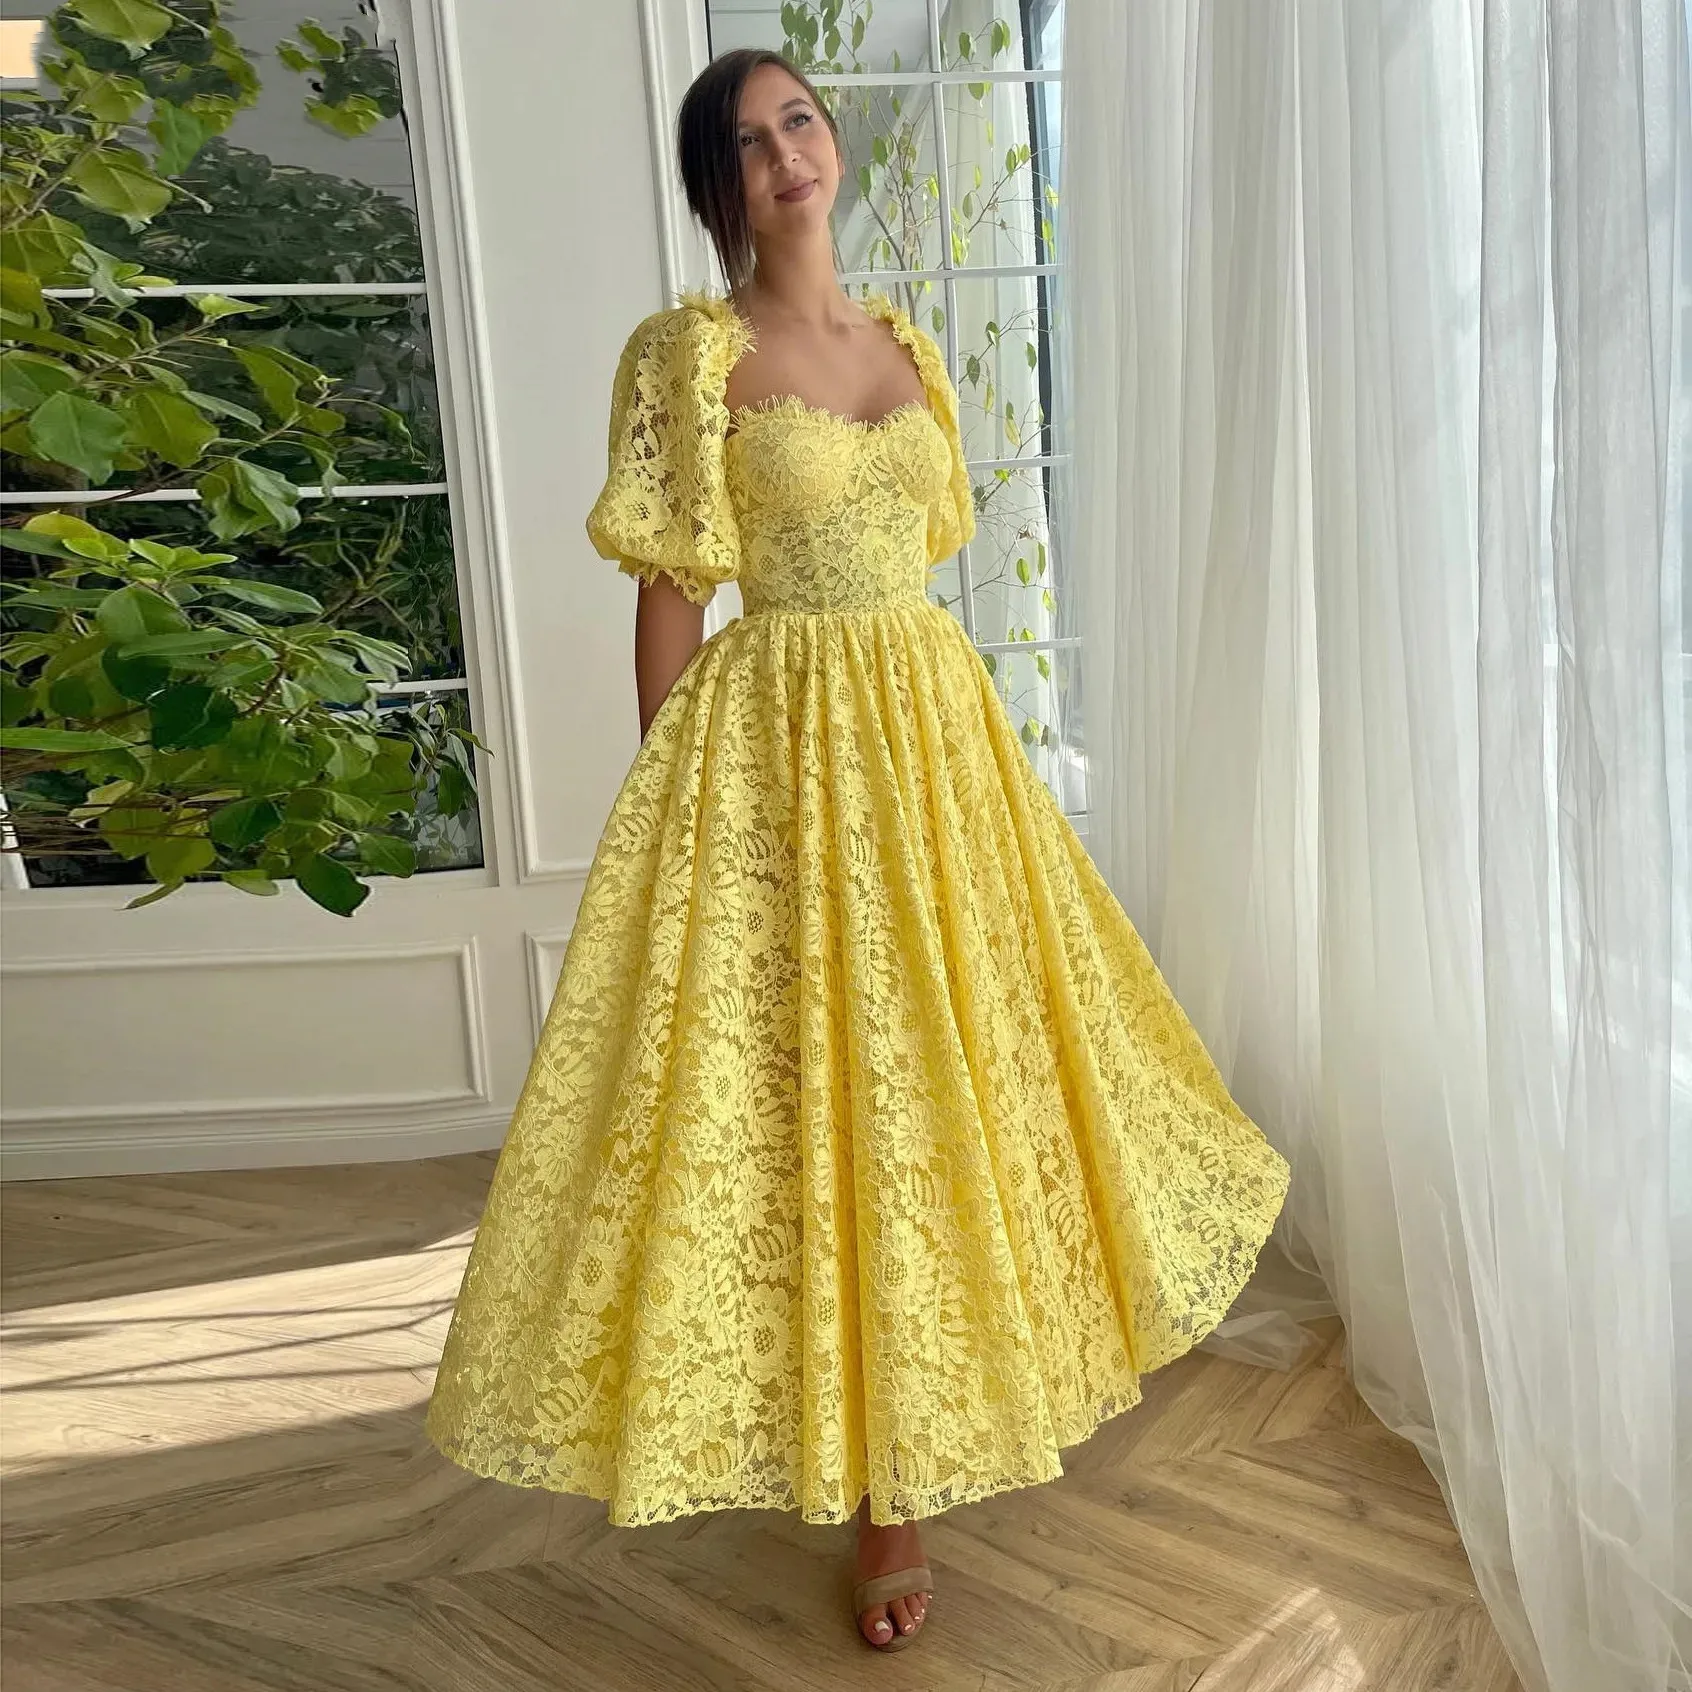 

Yellow Lace Prom Dress Short Puffy Sleeves Formal Party Cocktail Gowns Dubai Arabic Robe De Soiree Party Evening Gowns